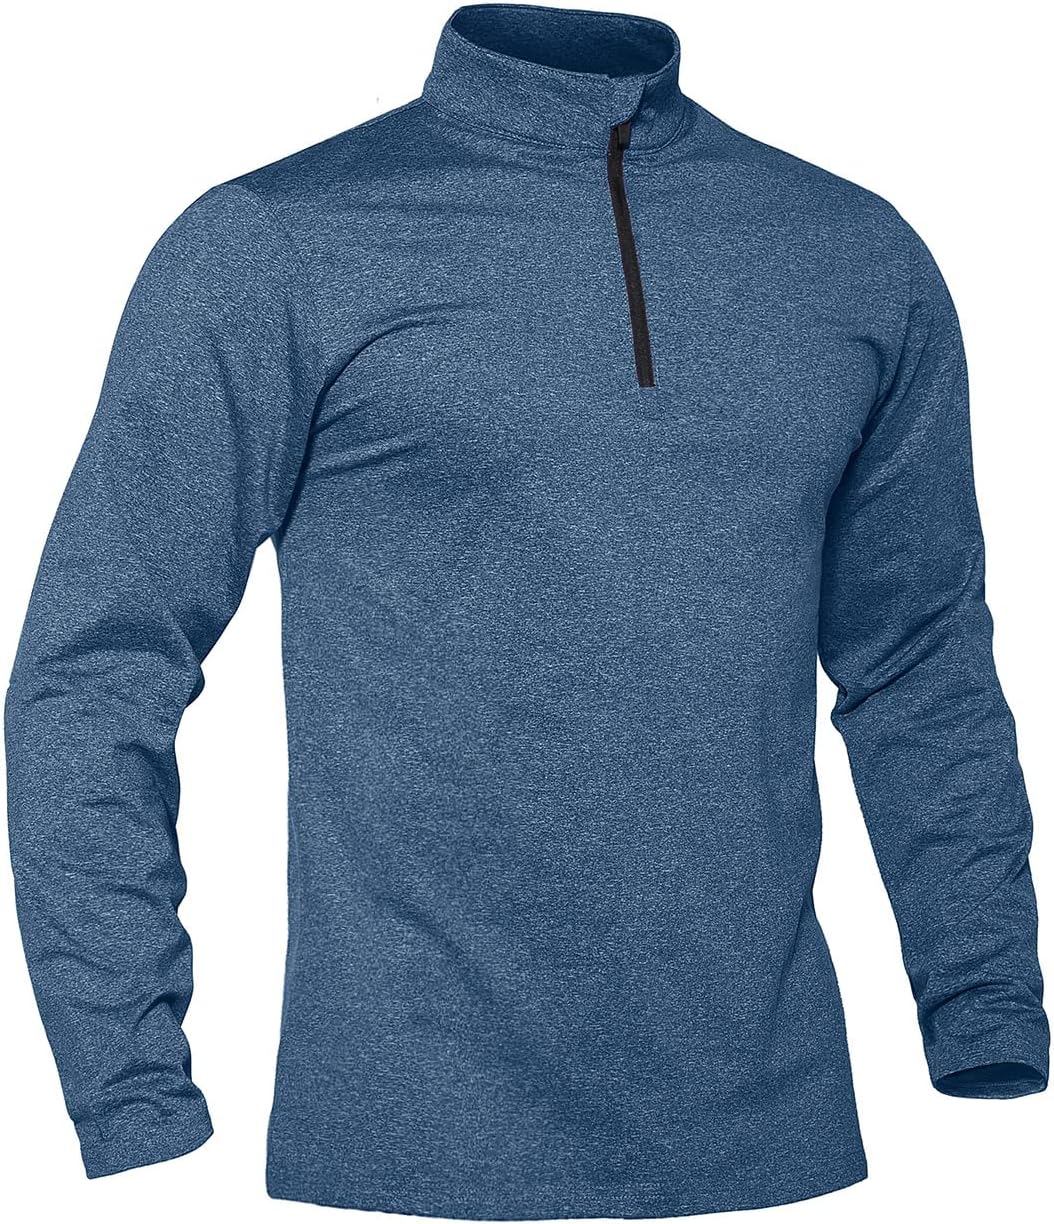 Read more about the article TACVASEN Men’s Sports Shirts for ONLY $28.98 (Was $43.99)